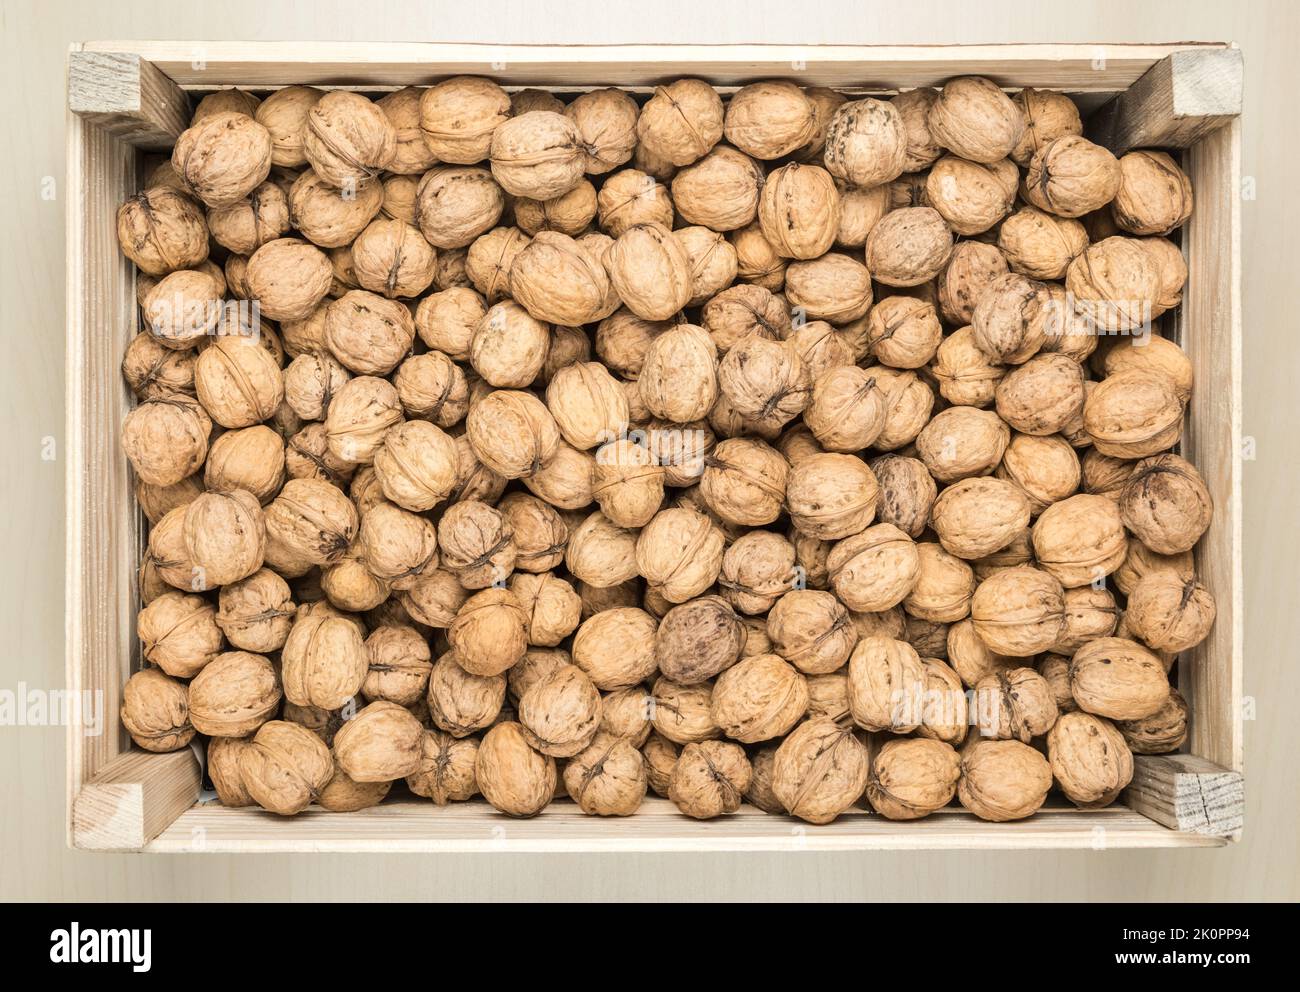 Wooden box filled with whole walnuts, view from above Stock Photo